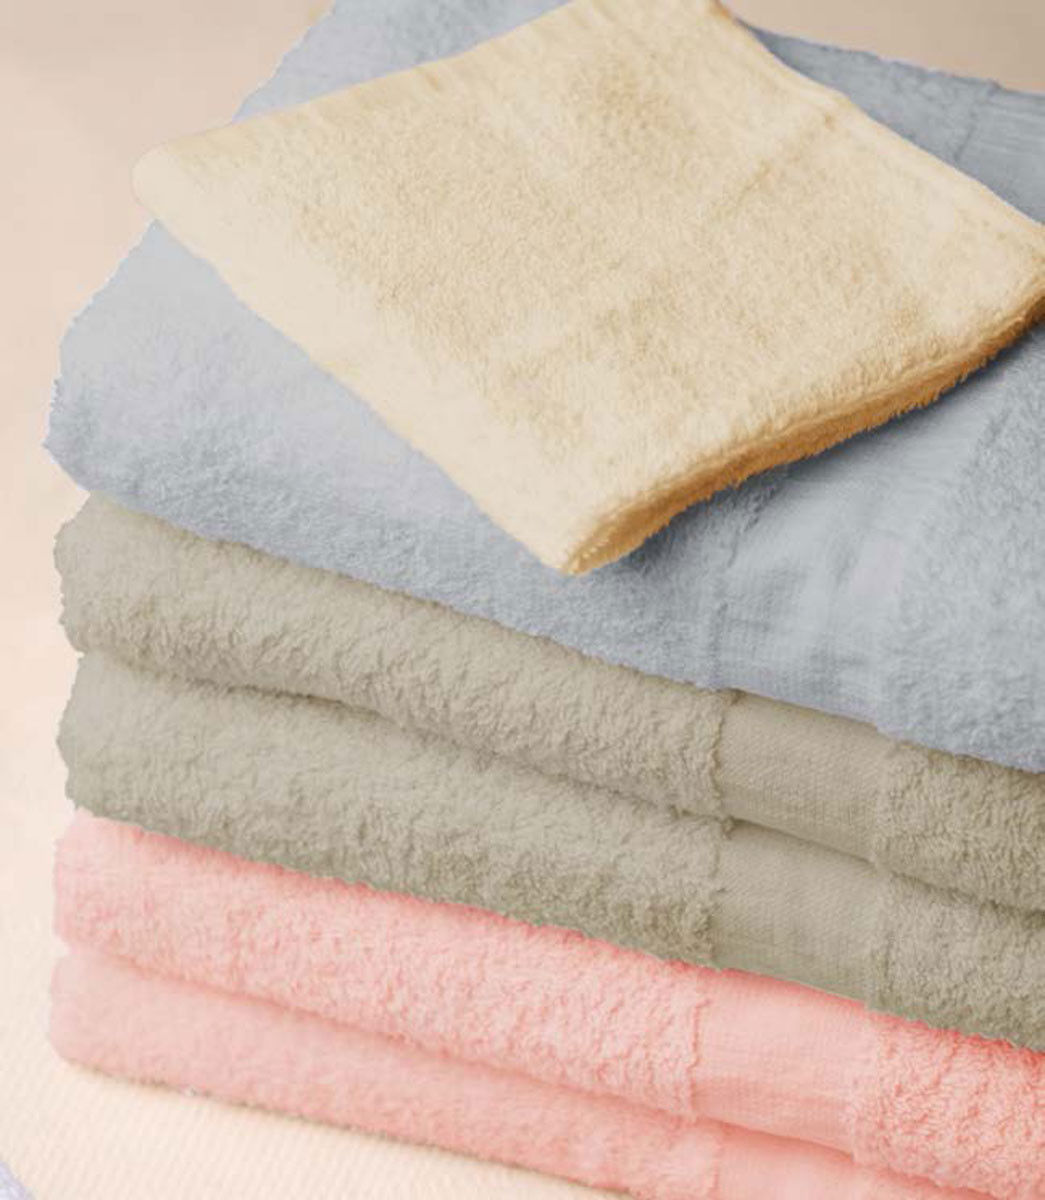 Do American cotton towels retain their color well?